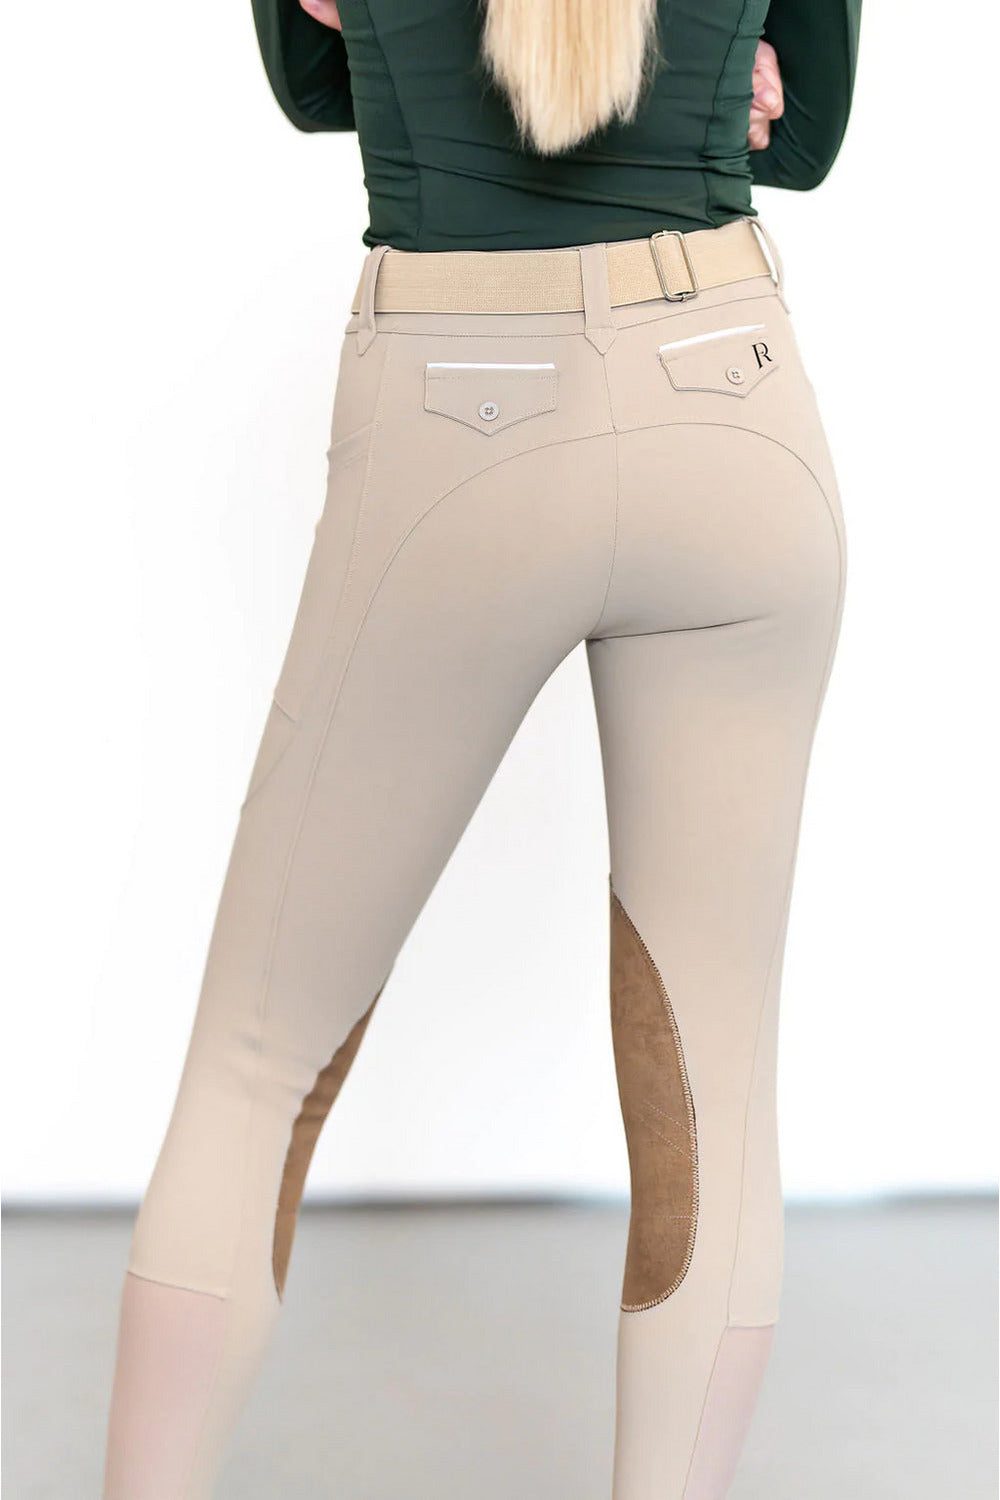 PRO Breeches - Suede Knee Patch